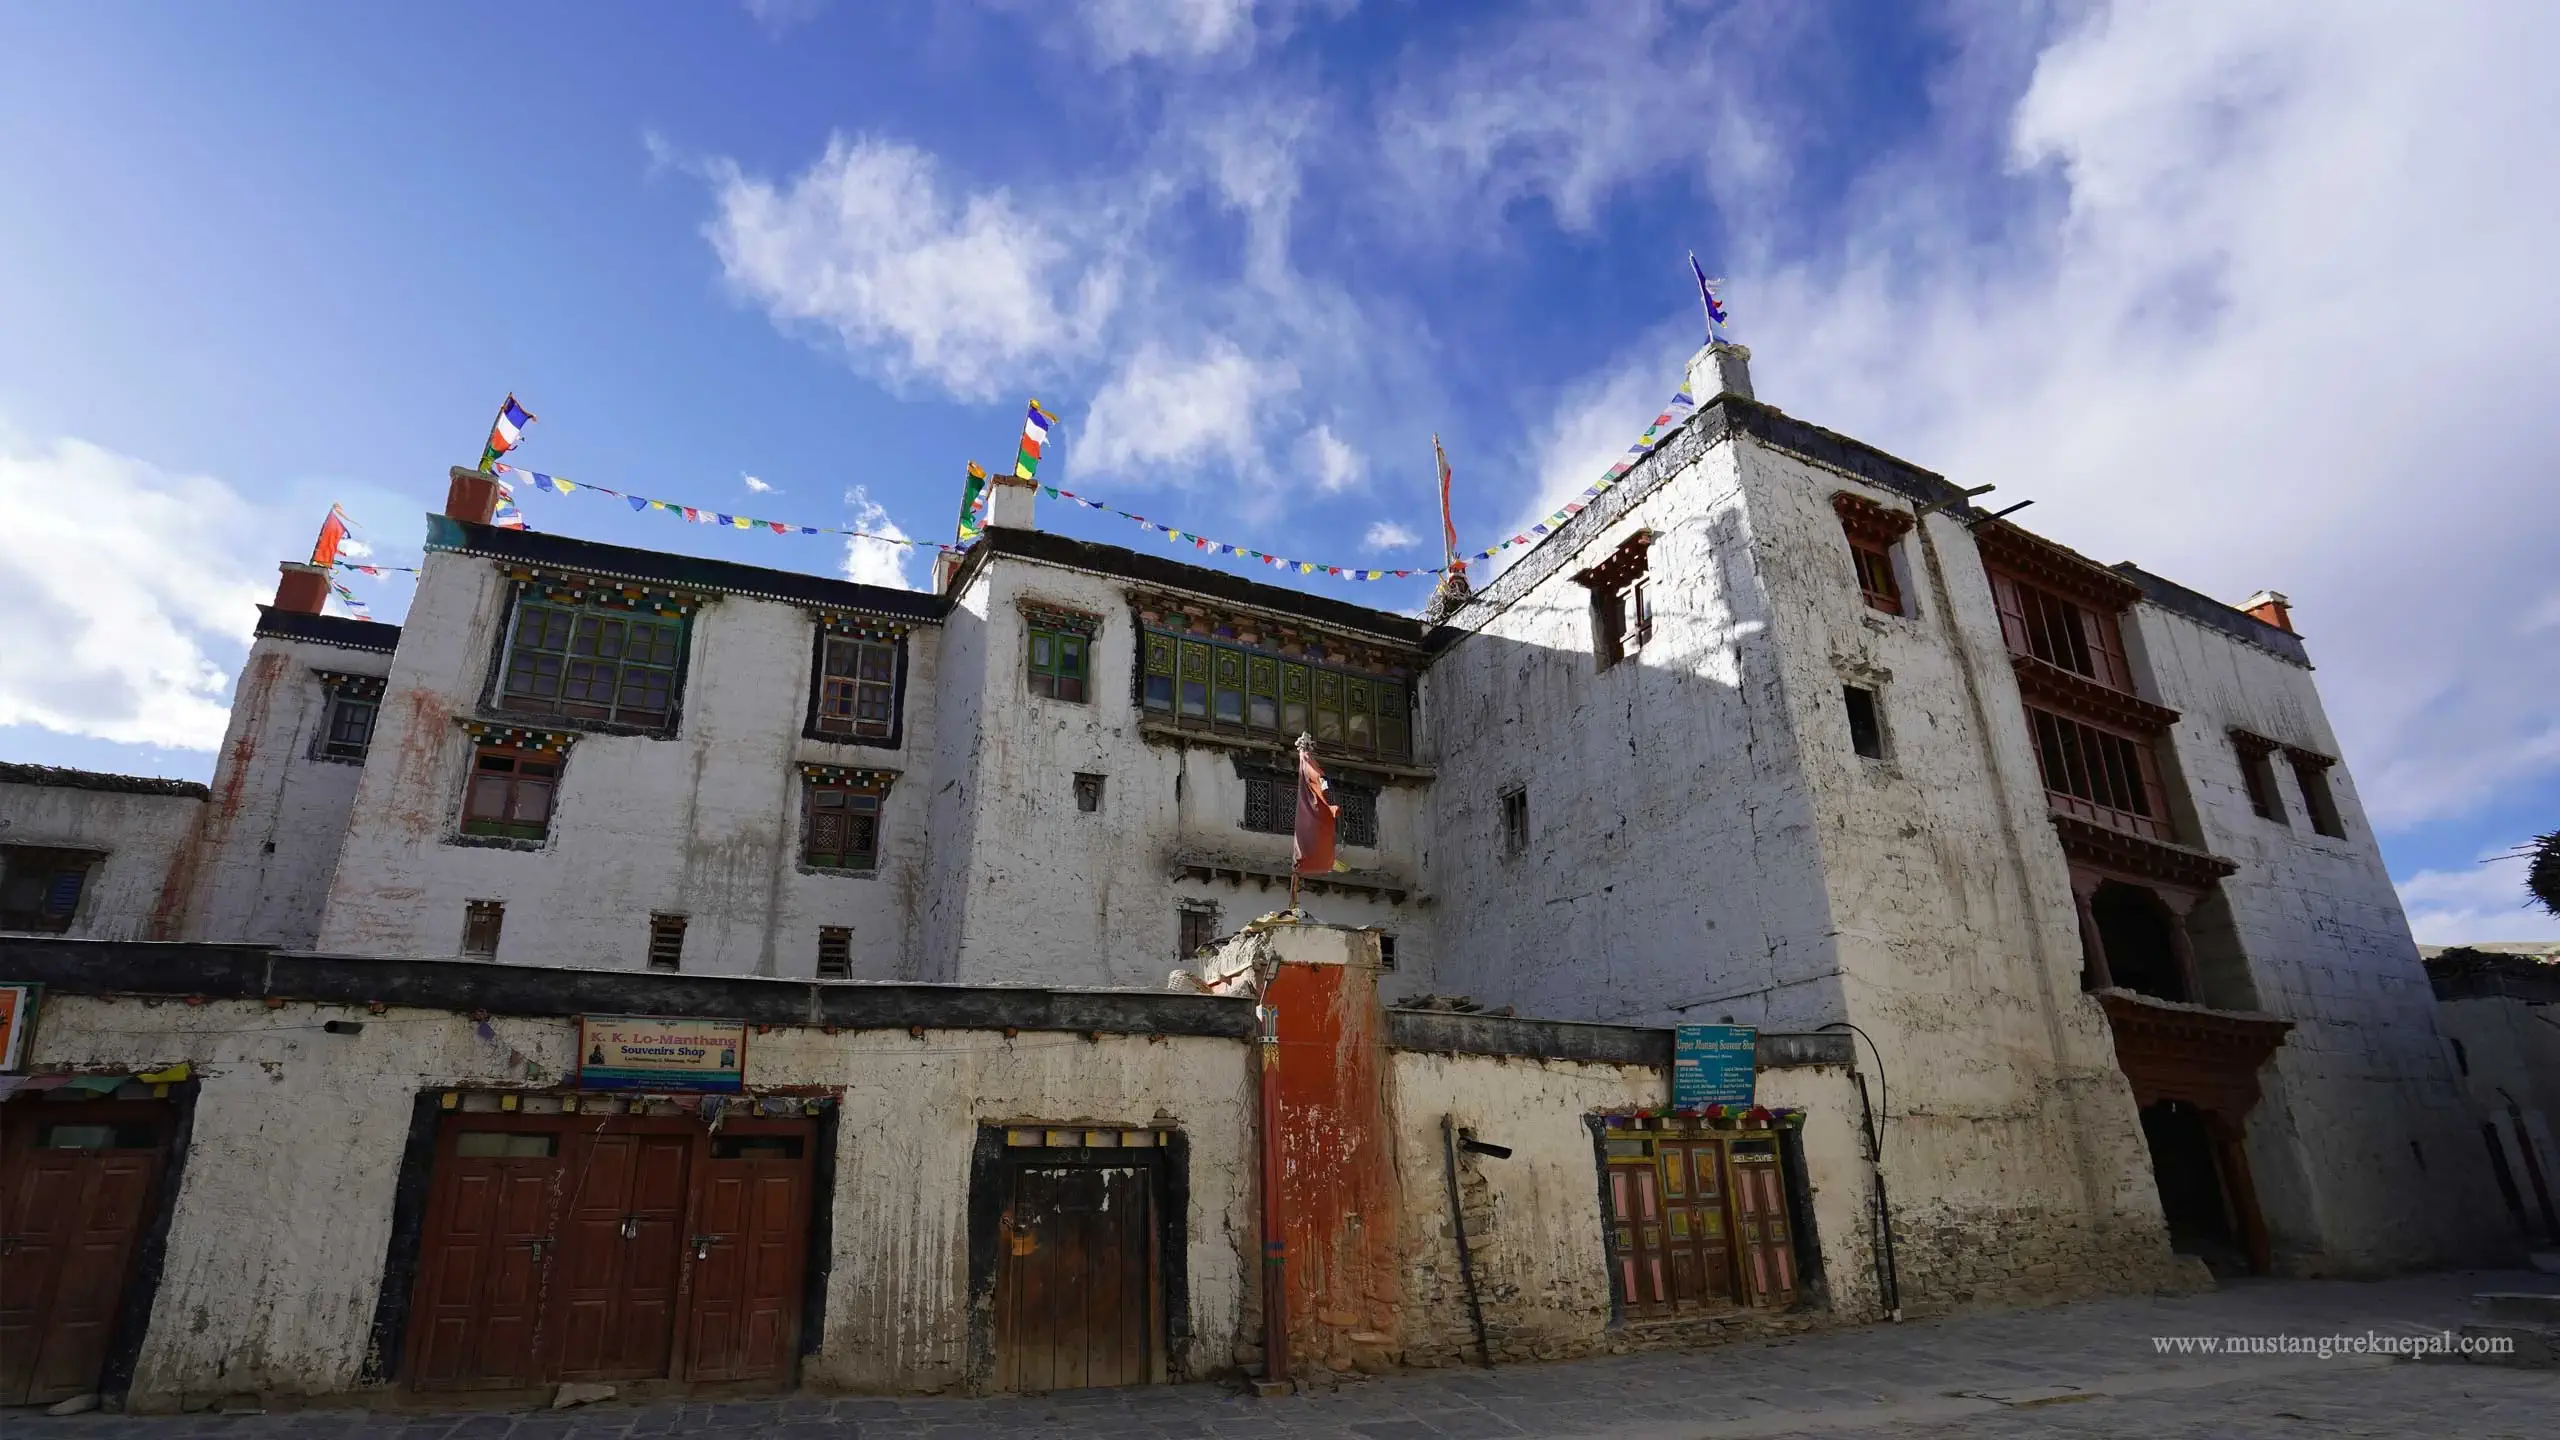 Travel Guide for Lo Manthang Nepal